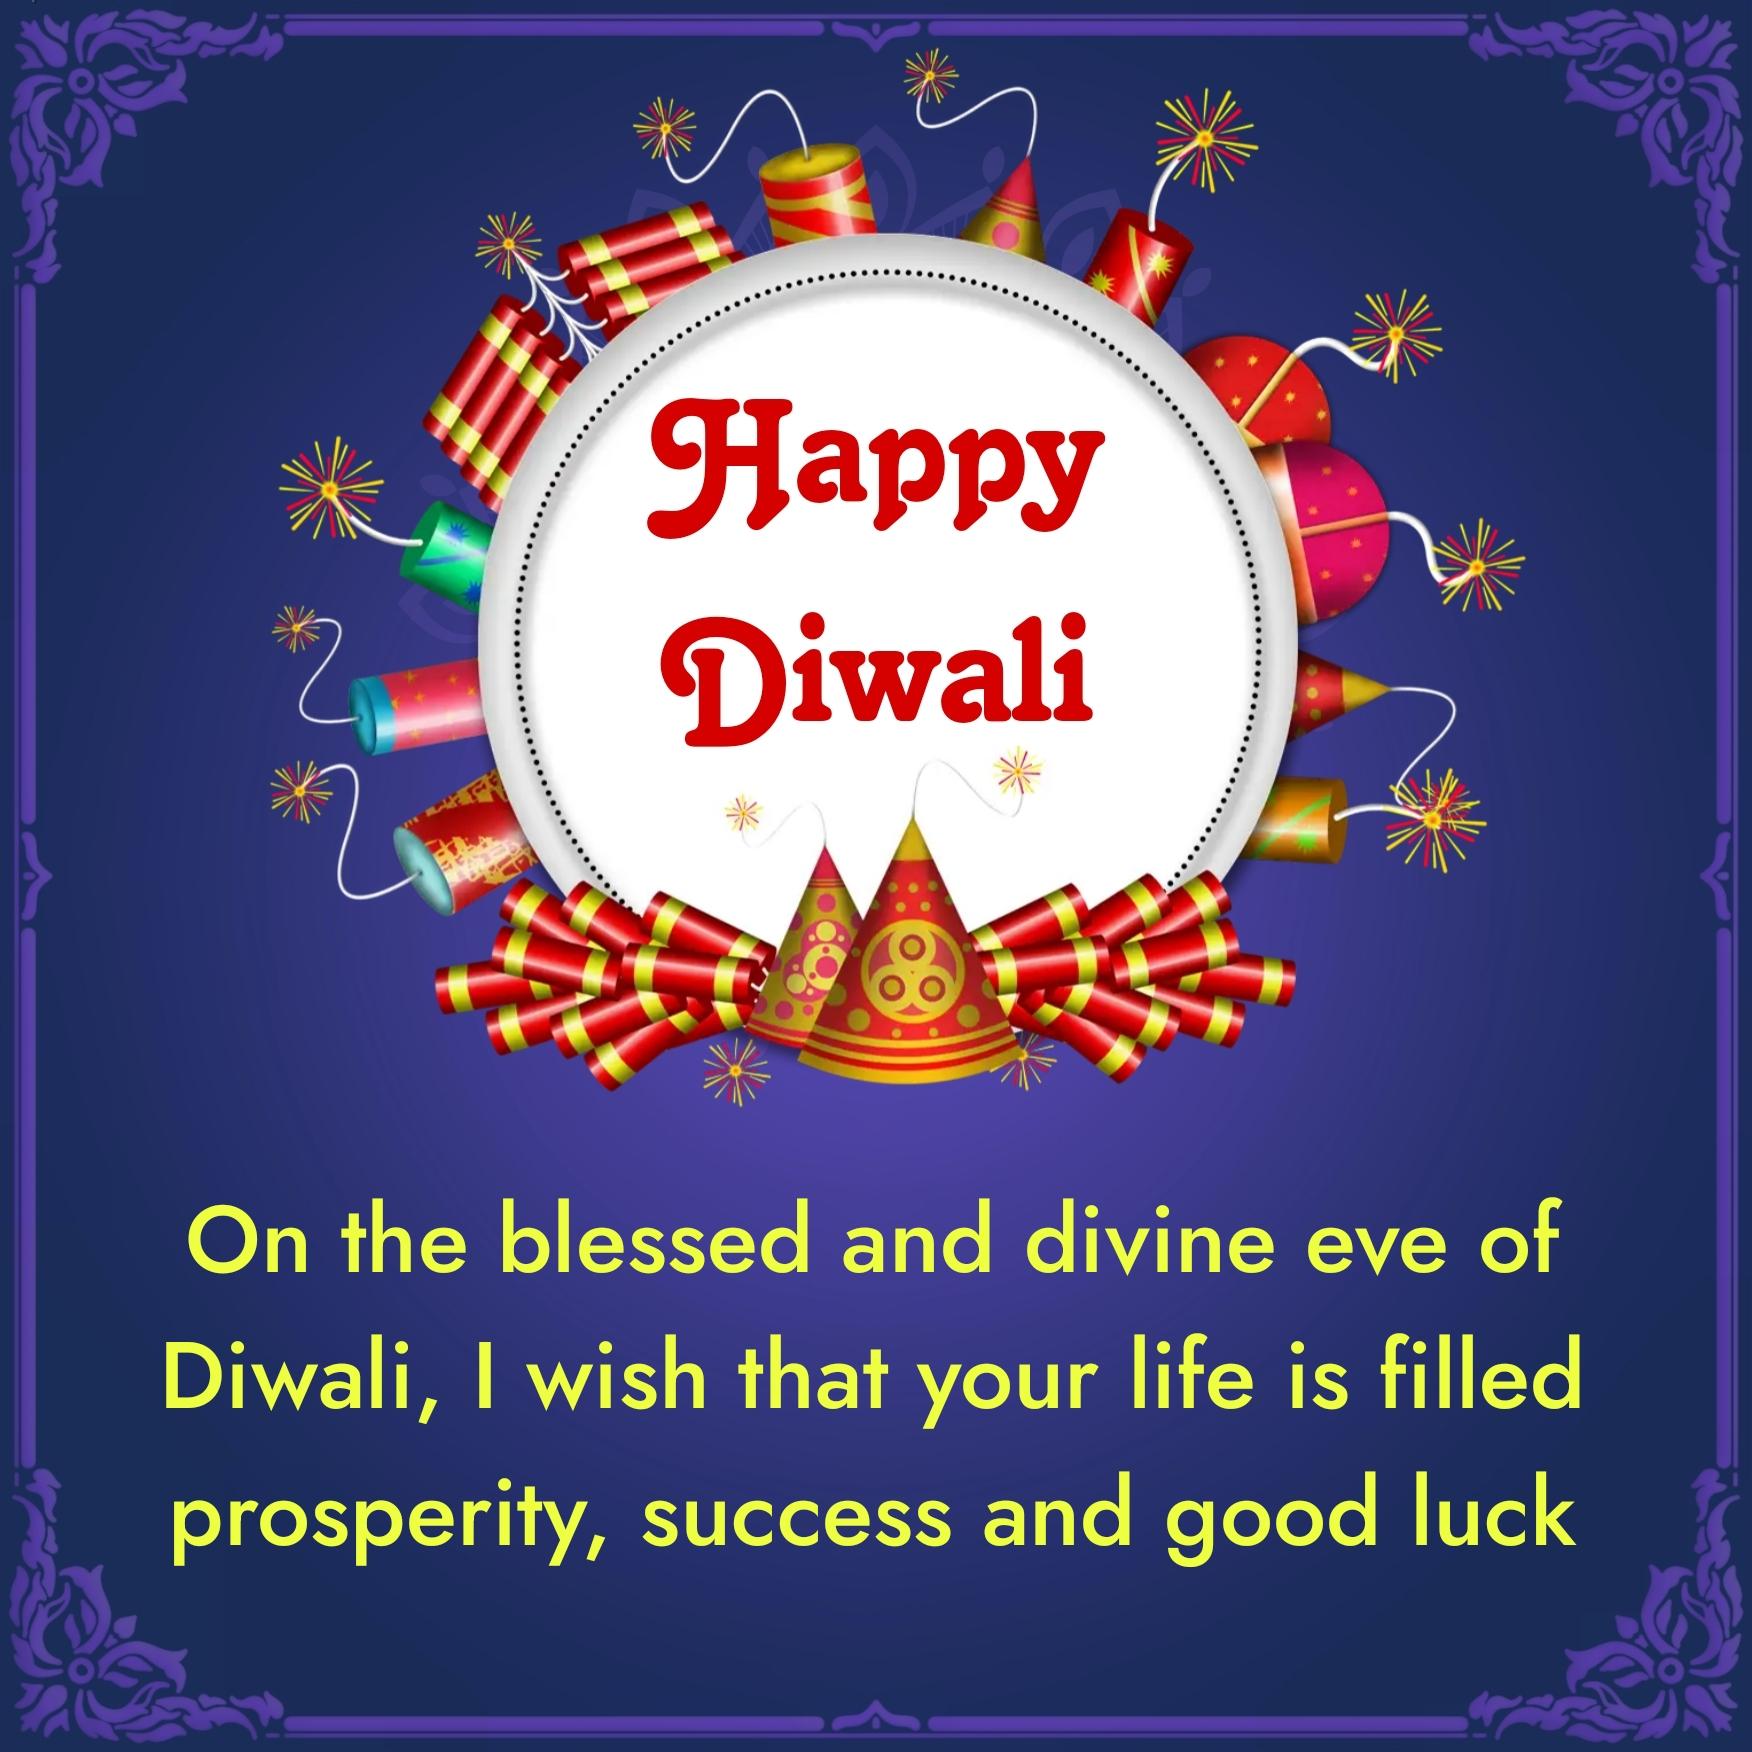 On the blessed and divine eve of Diwali